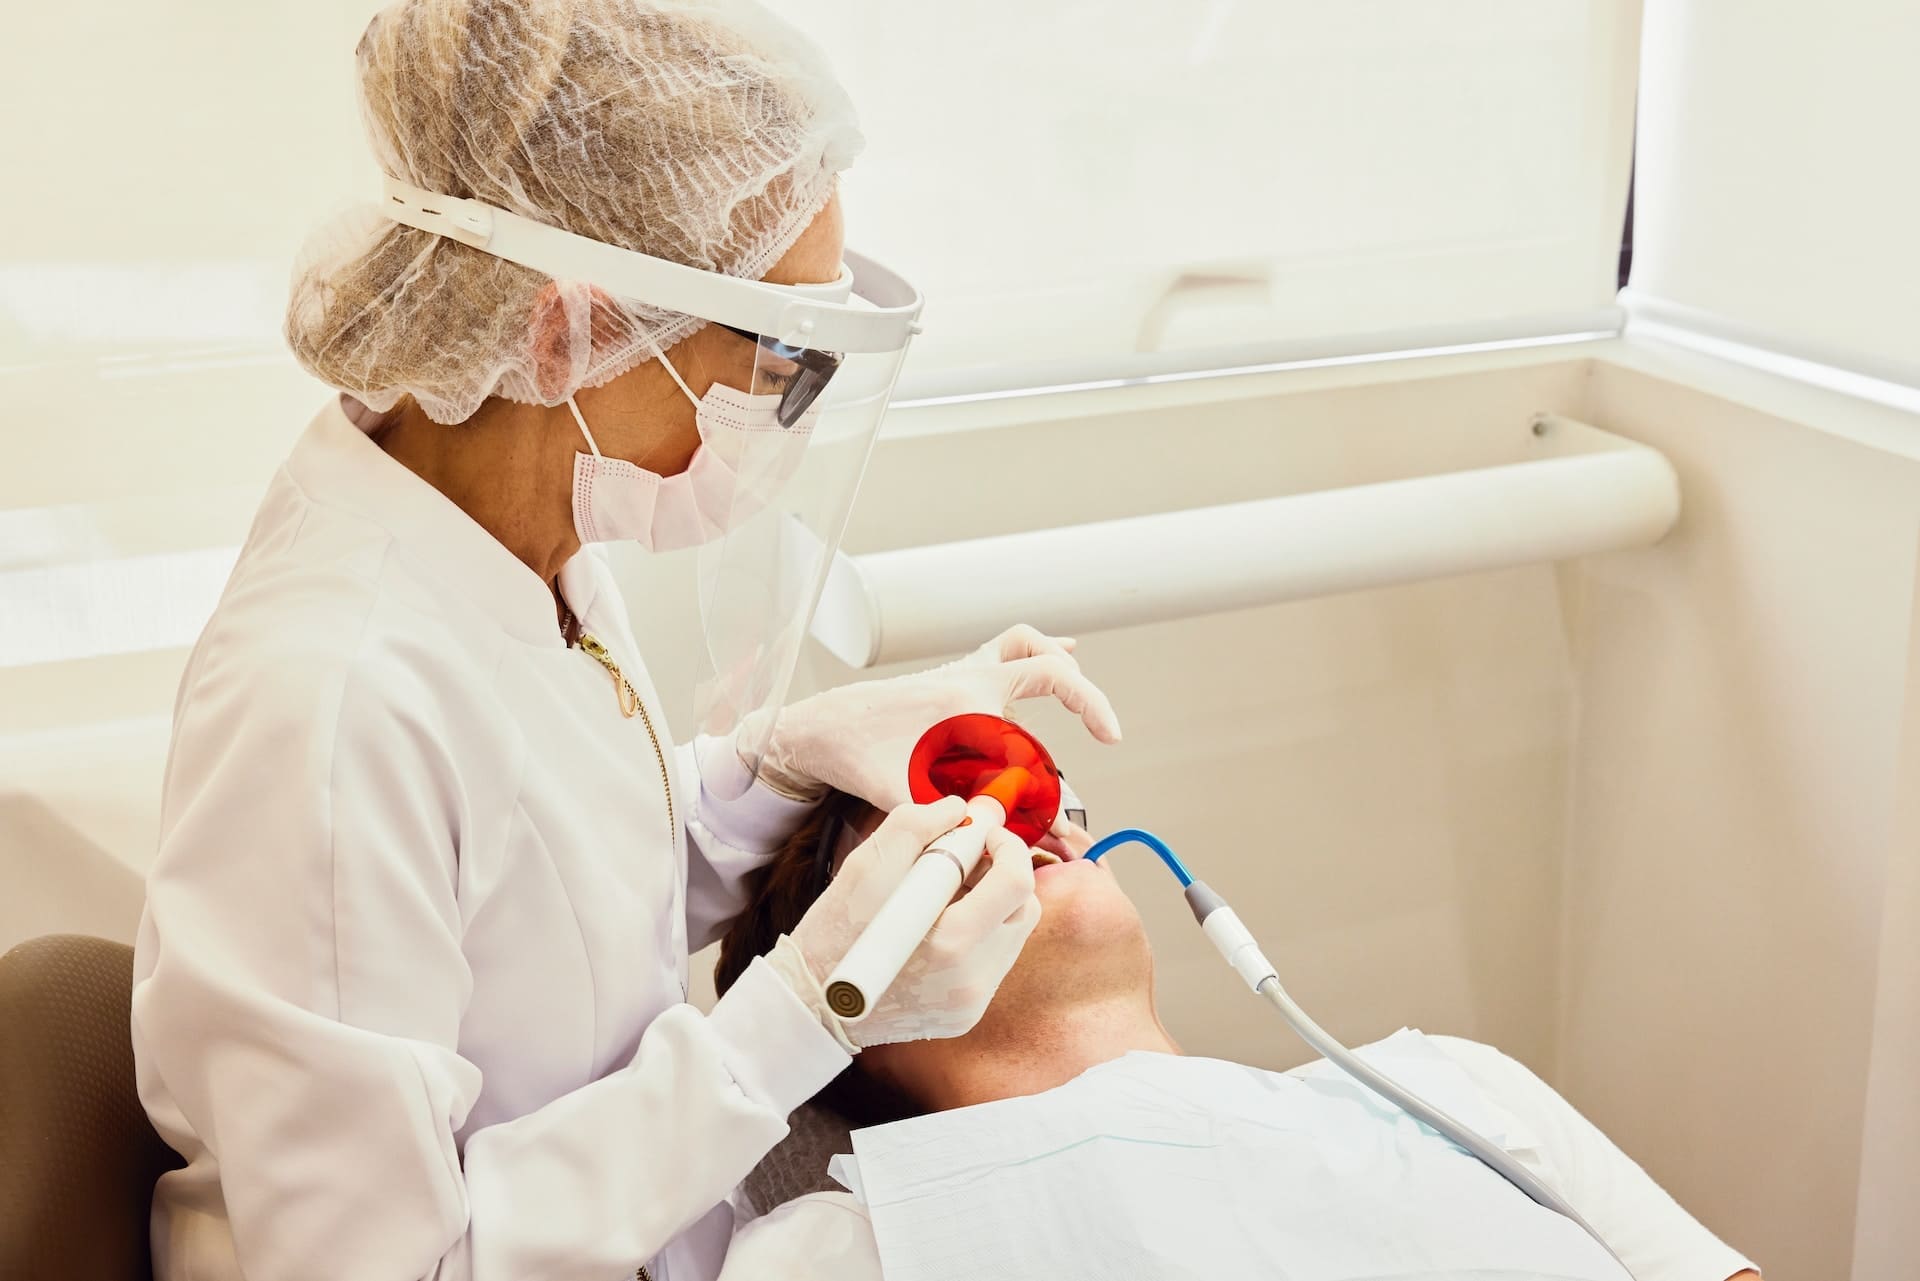 Dentist in surgical uniform, mask, and gloves providing dental treatment to the patient, handling medical instruments.